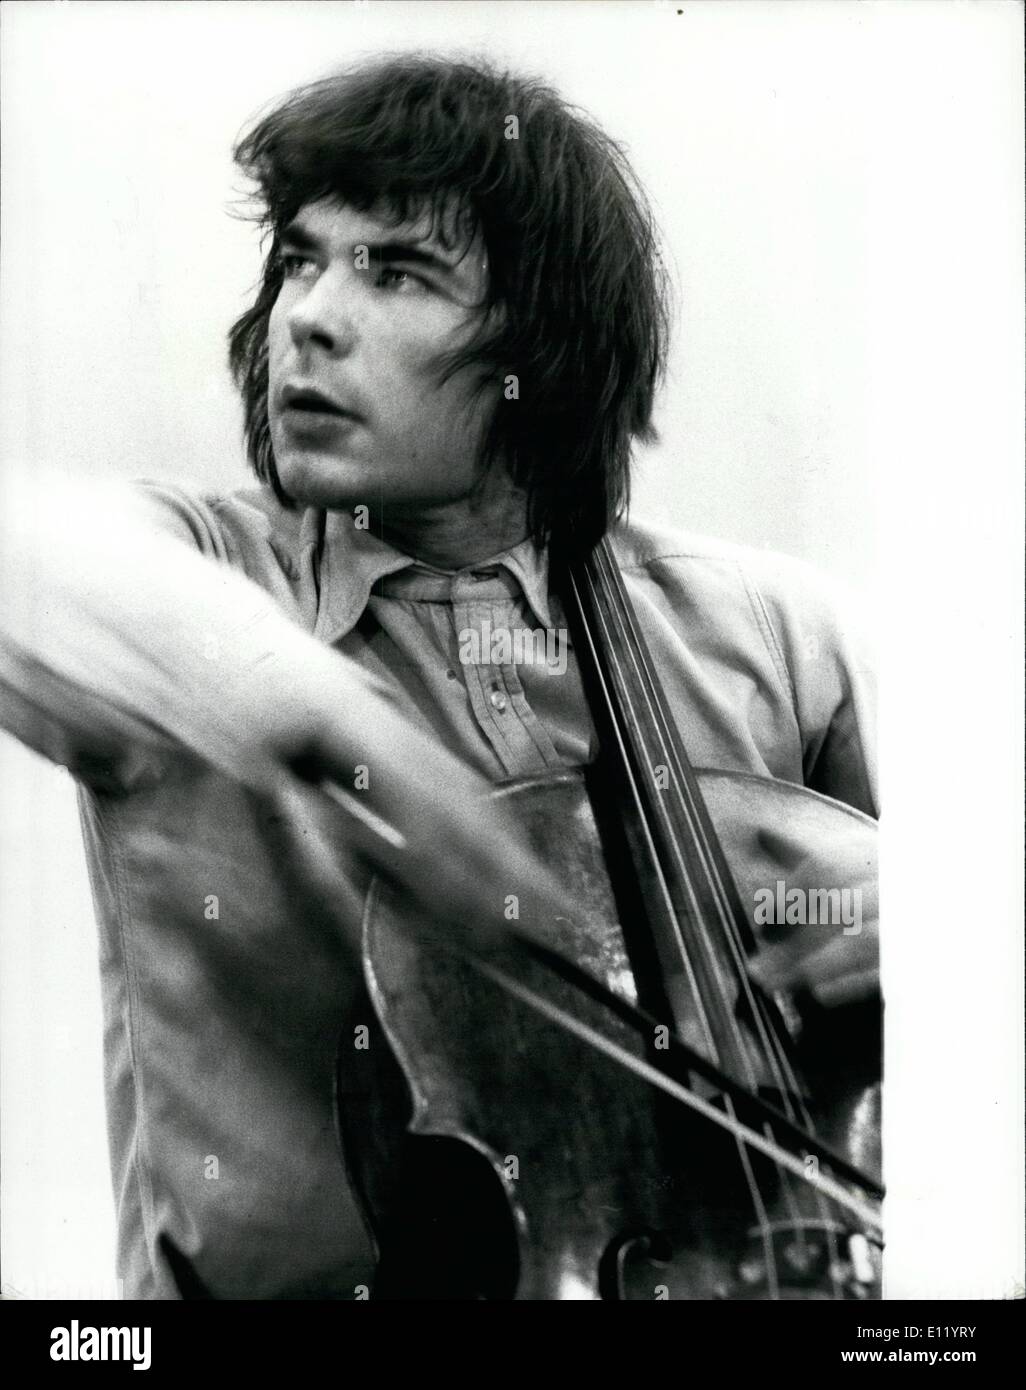 Apr. 04, 1981 - Lloyd Webber Replaces Russian Cellist: Julian Lloyd Webber, brother of the composer Andrew Lloyd Webber, is replacing the Russian cellist Natalia Gutman for today's concert with the Royal Philharmonia Orchestra at the Royal Festival Hall. It was to have been the young Russian cellist's London debut, but she has been taken ill. So Lloyd Webber, Britain's foremost young cellist, is to take her place in the programme which remains unchanged, including the Shostakovich Concerto. Photo shows Julian Lloyd Webber rehearsing at the Henry Wood Hall for today's concert. Stock Photo